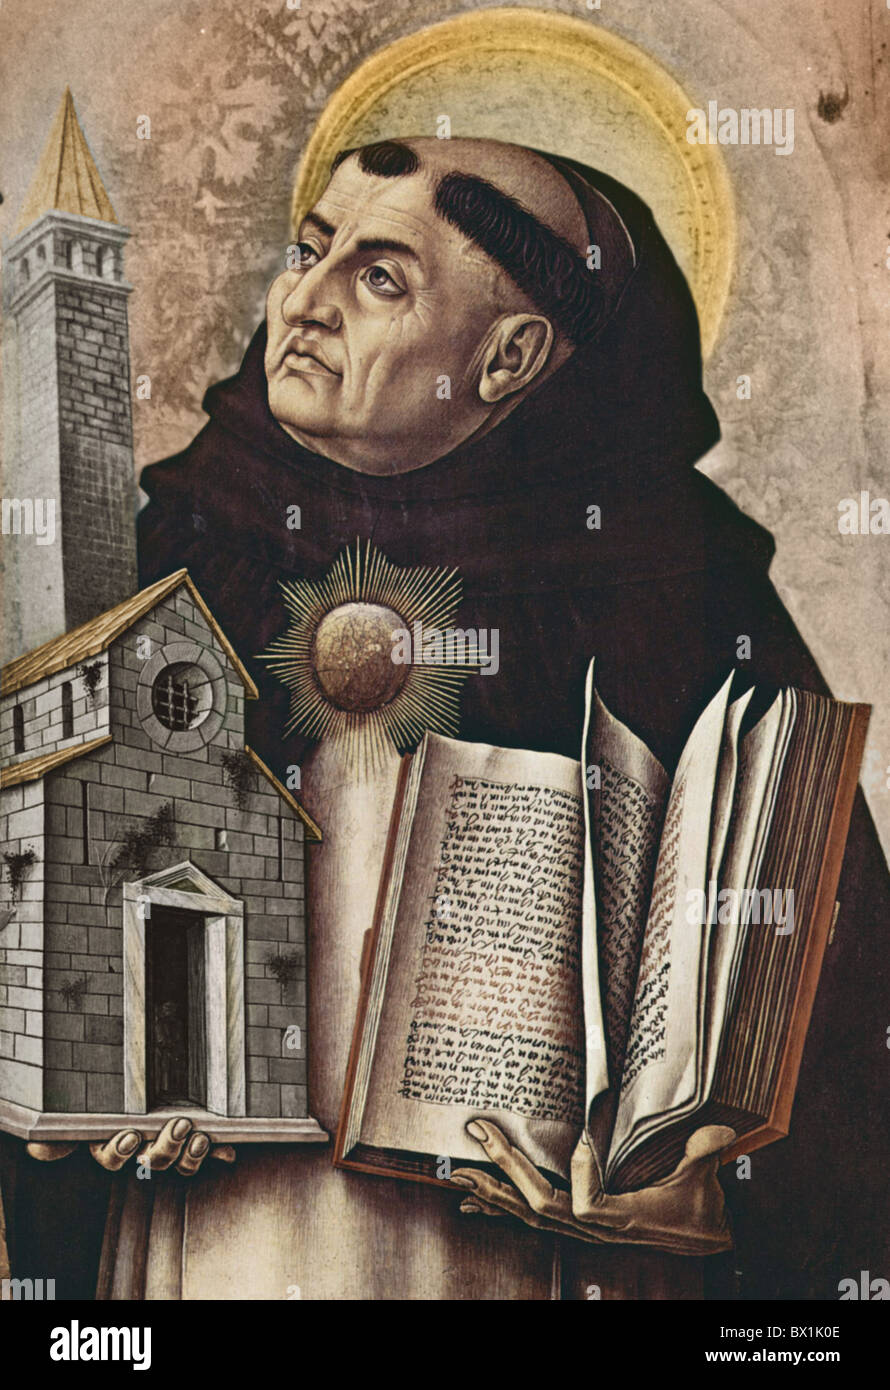 Thomas Aquinas, circa 1225 - 7.3.1274, Italian philosopher and theologit, half length, altarpiece, print after painting by Carlo Crivelli, 1476, later coloured, Stock Photo